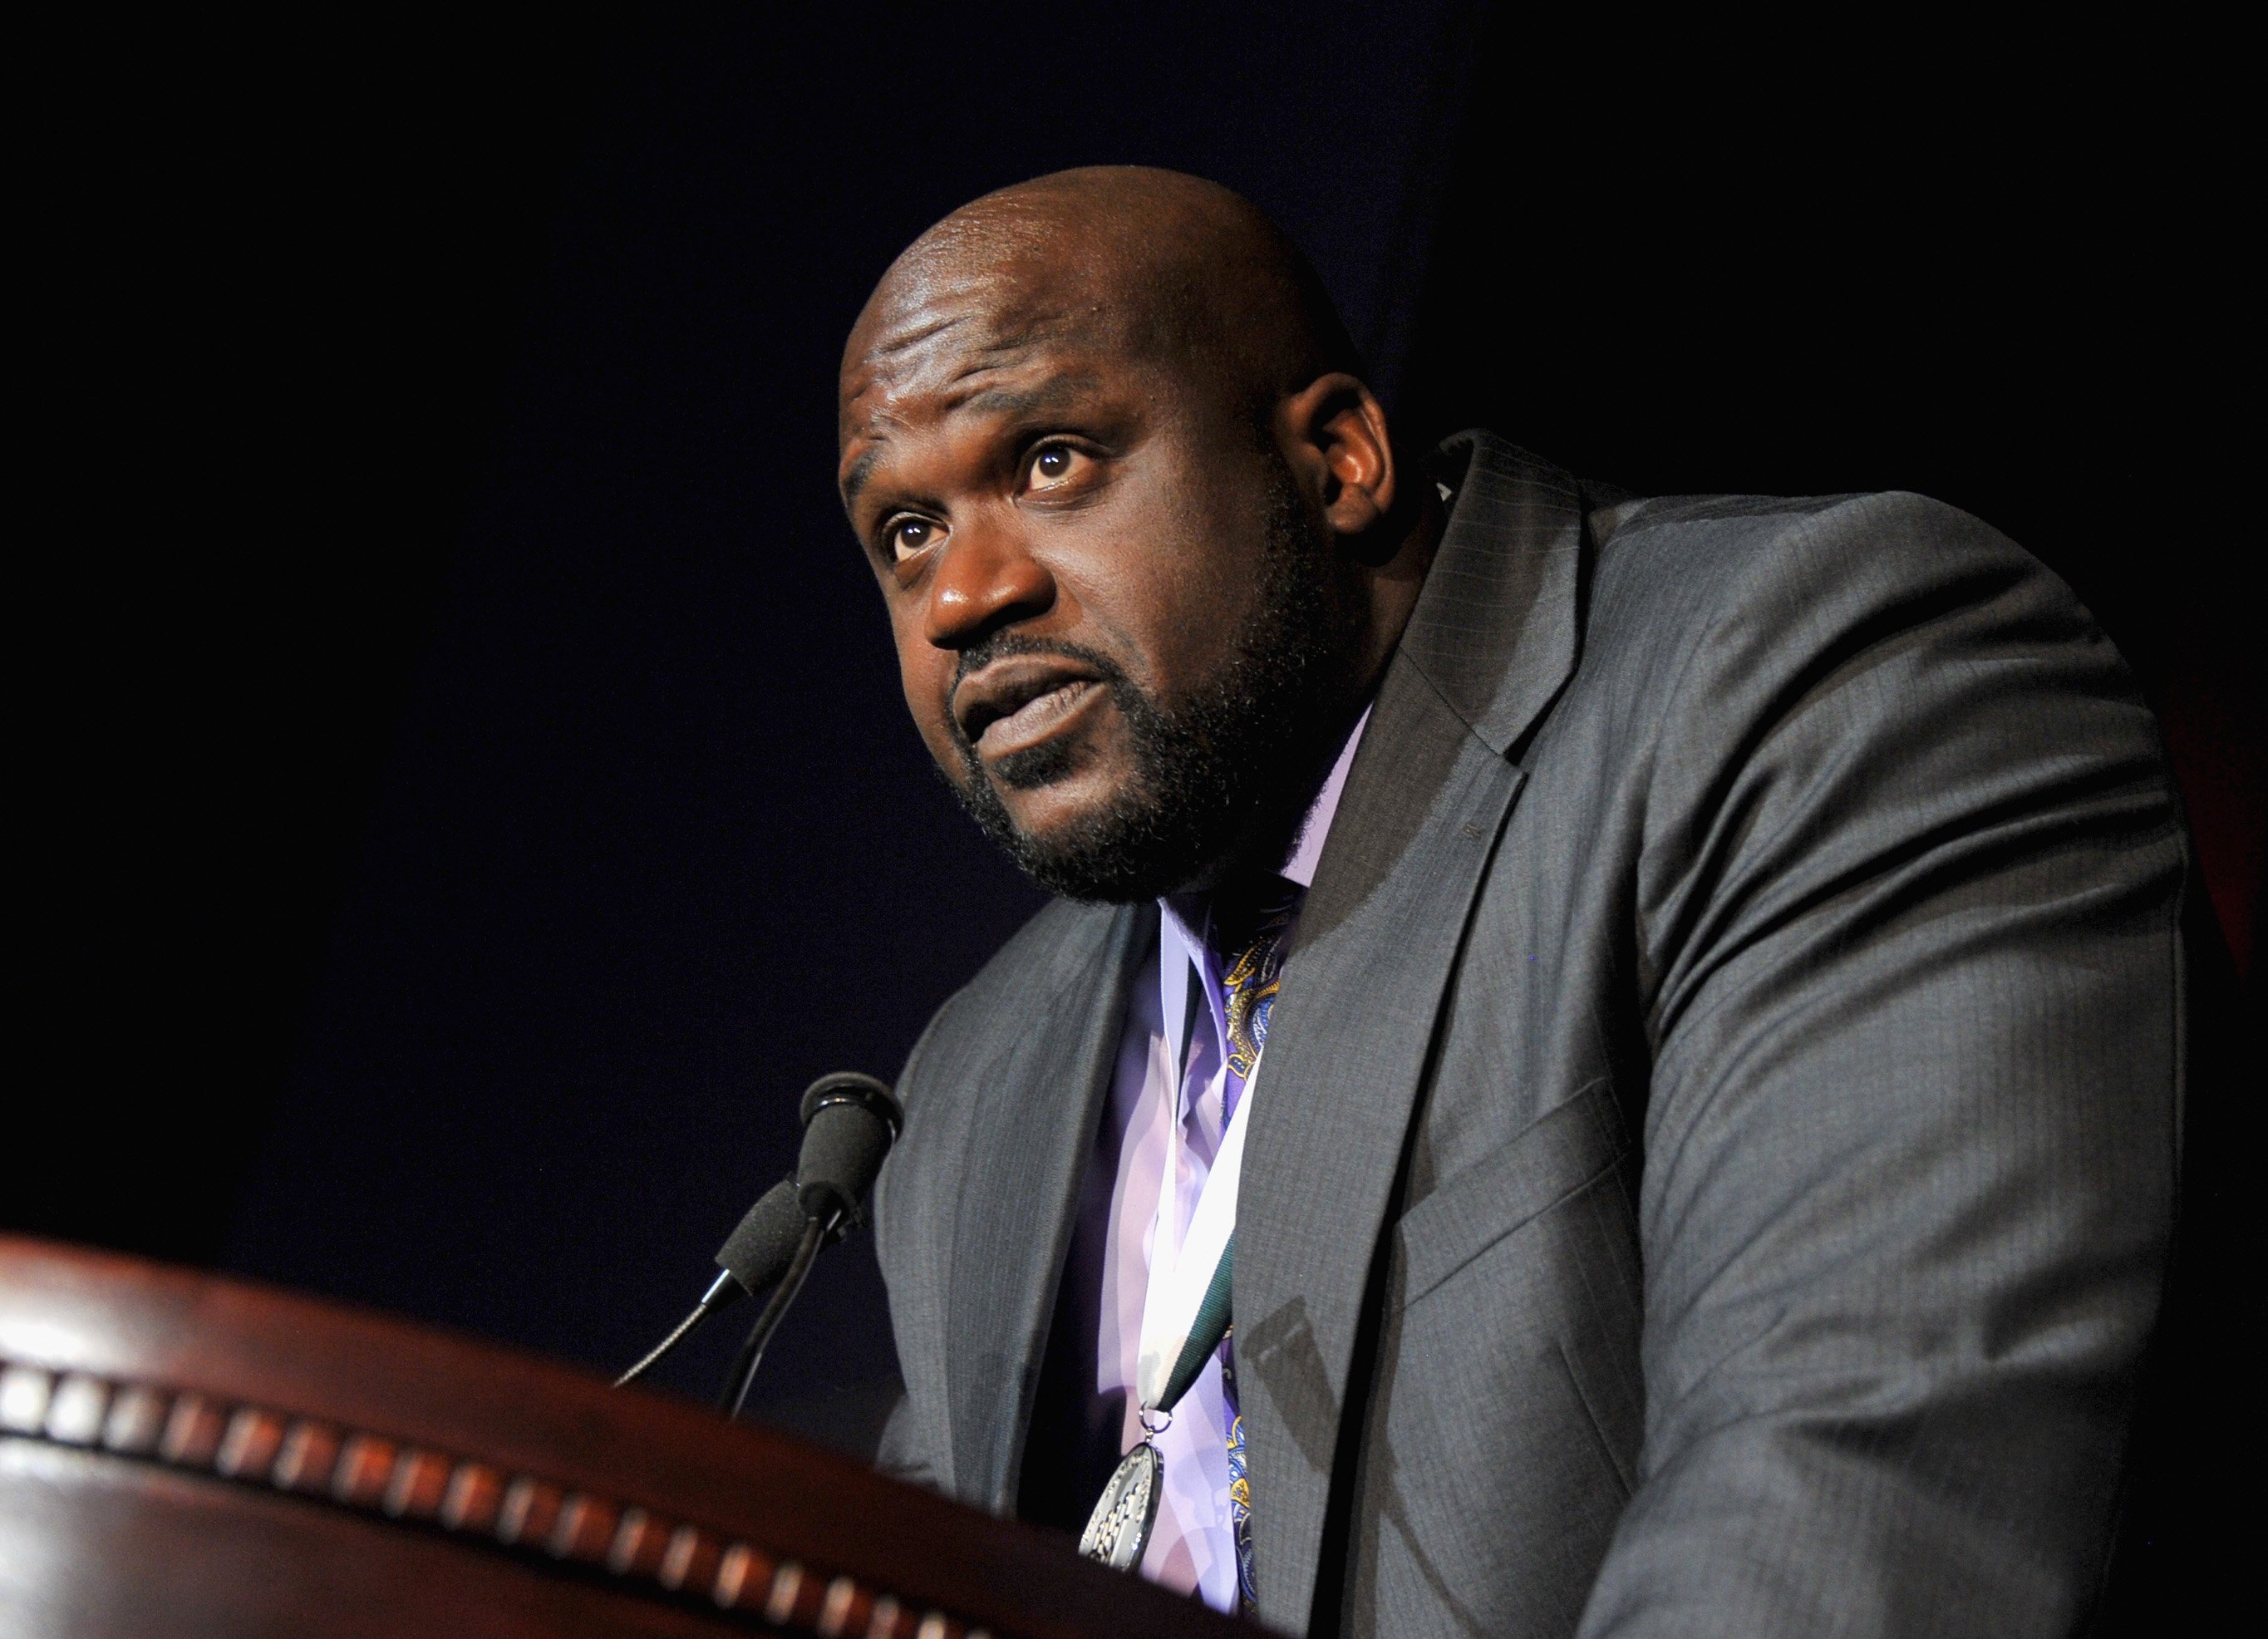 Shaquille O'Neal speaking at the 27th Annual Great Sports Legends Dinner in September 2012. | Photo: Getty Images